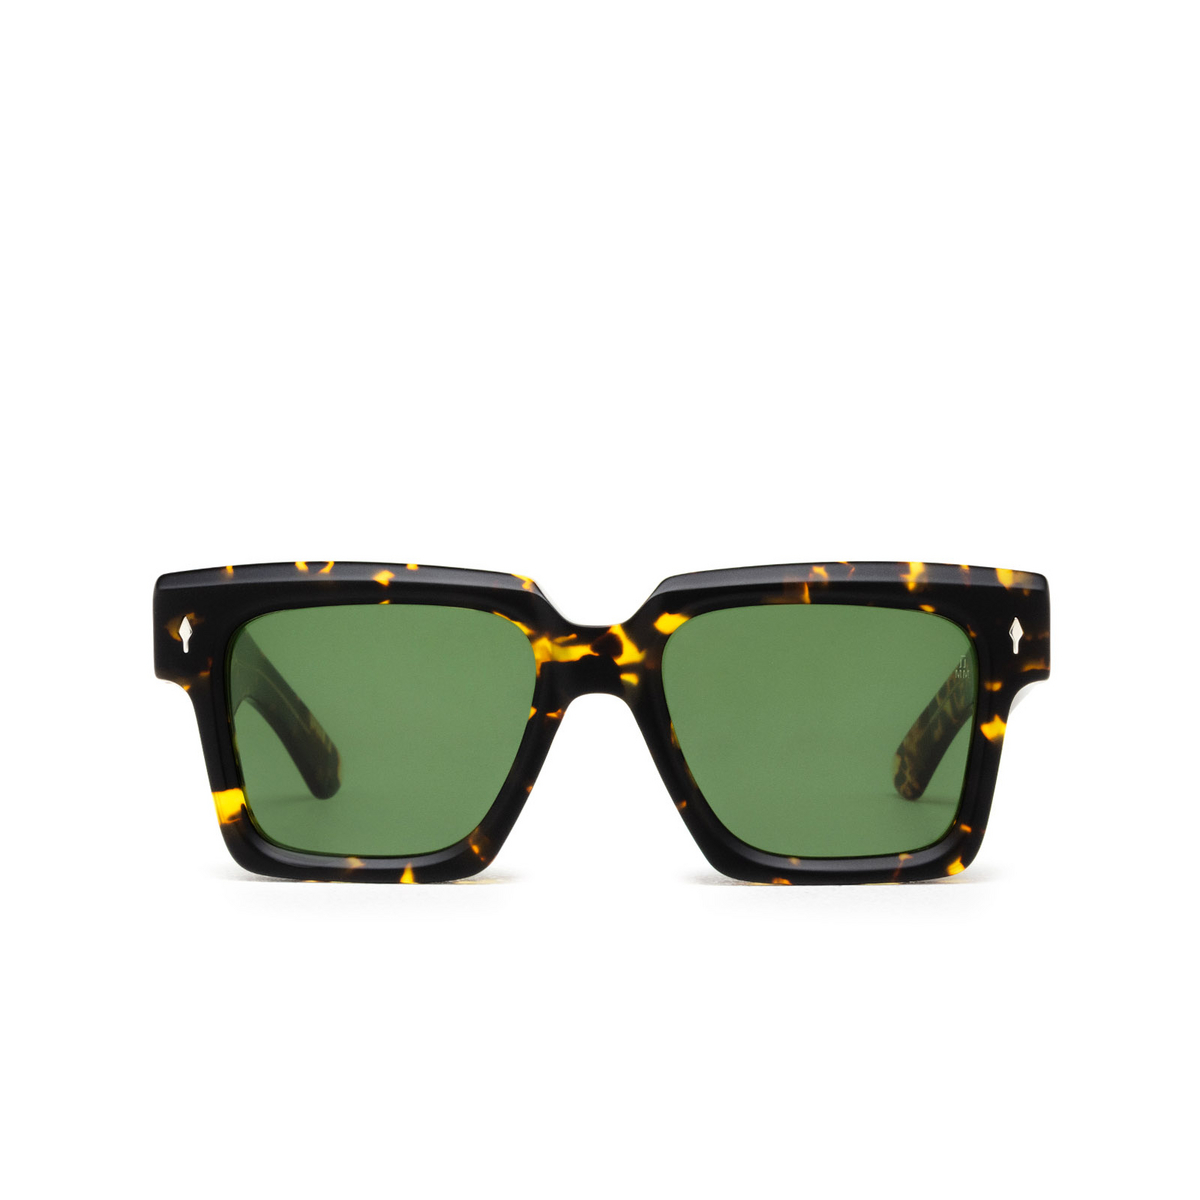 Jacques Marie Mage BELIZE Sunglasses TOKYO TORT - front view